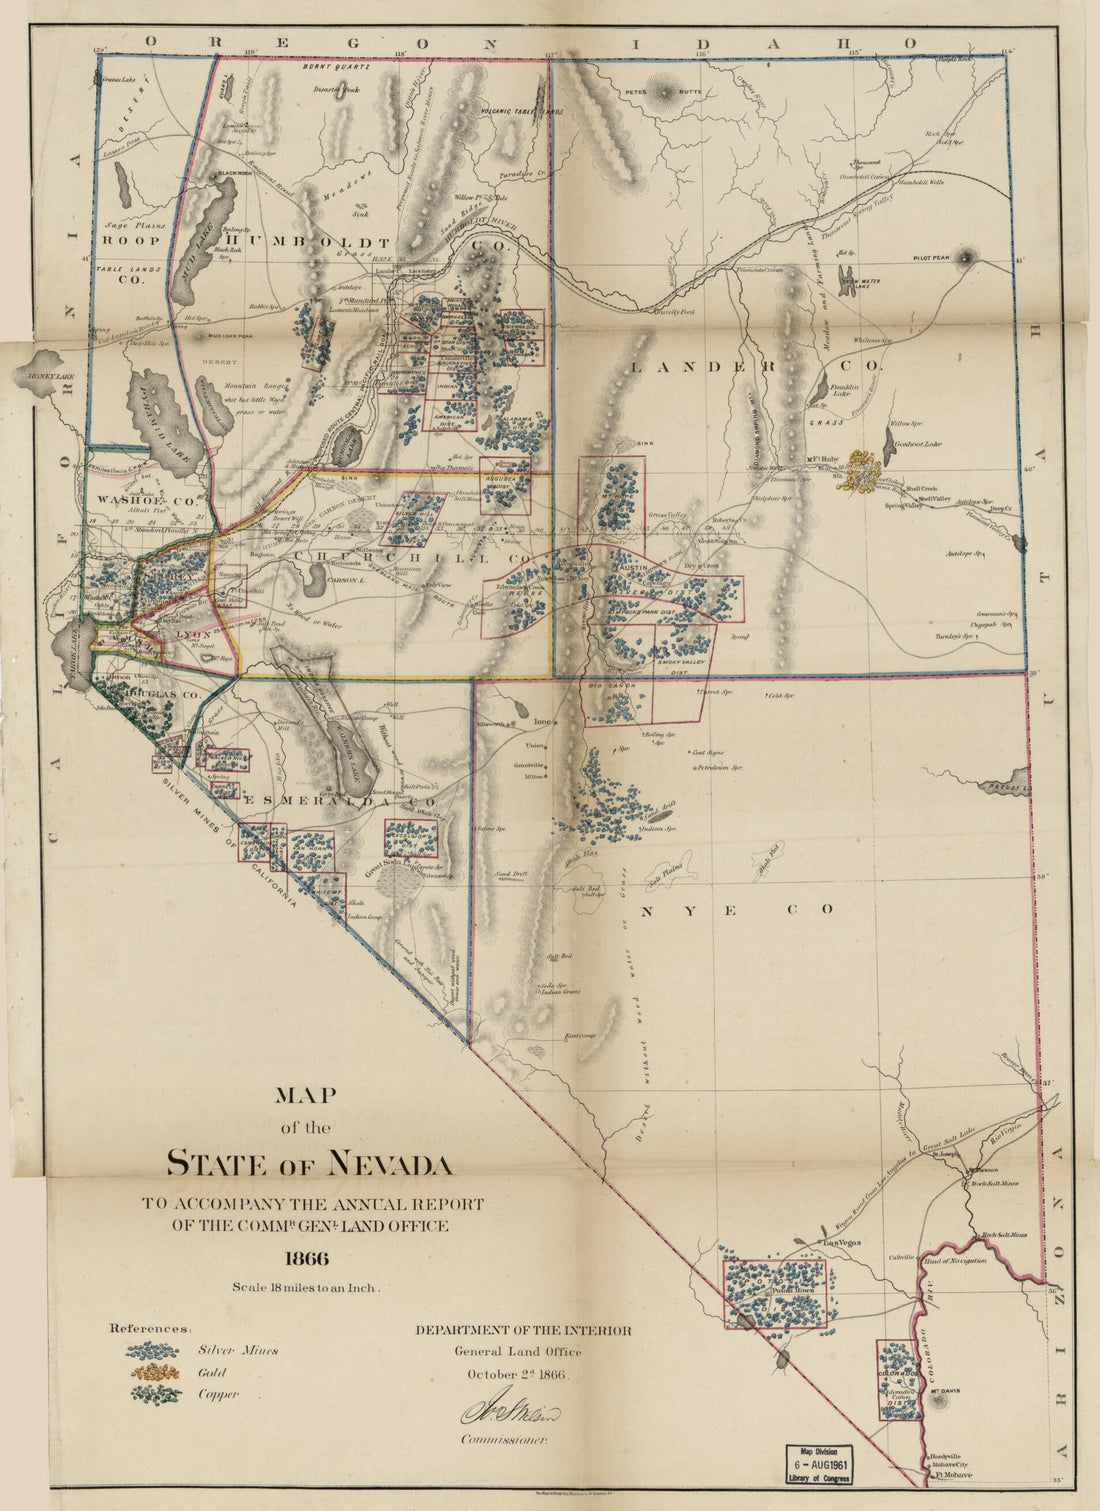 This old map of Map of the State of Nevada : to Accompany the Annual Report of the Commr. Genl. Land Office from 1866 was created by Manufacturing &amp; Lithographic Co Major &amp; Knapp Engraving,  United States. General Land Office in 1866